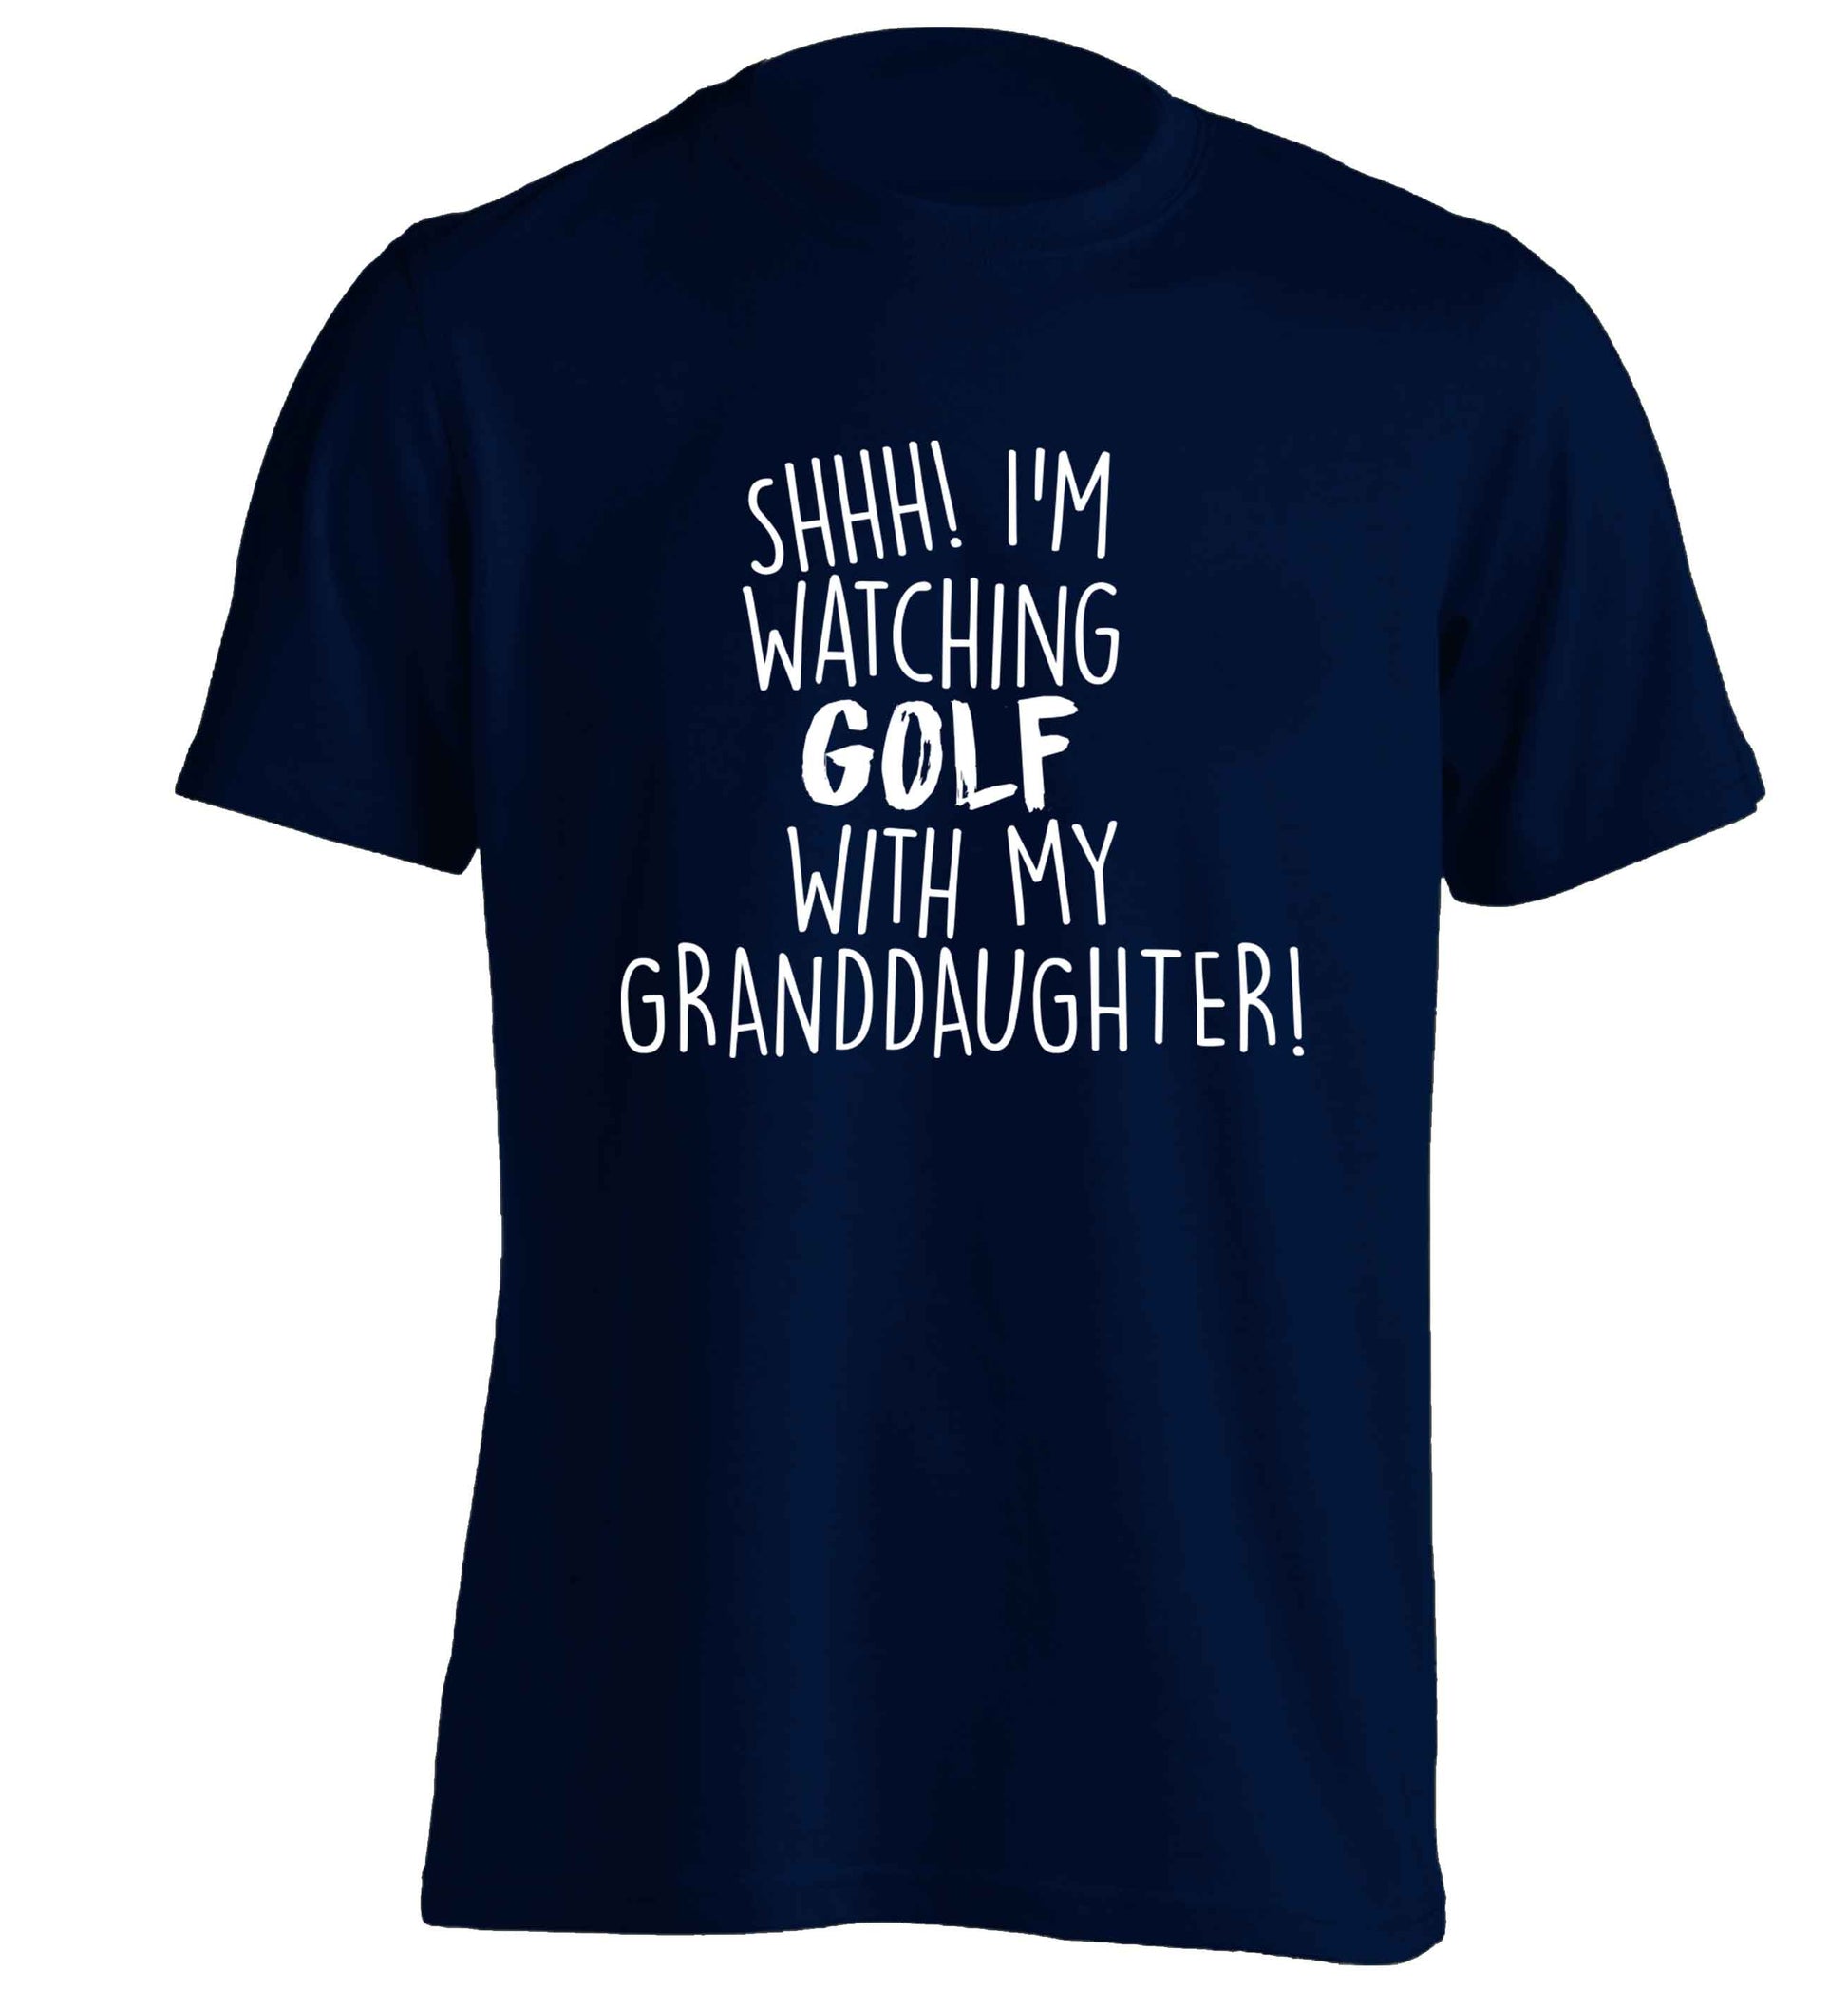 Shh I'm watching golf with my granddaughter adults unisex navy Tshirt 2XL